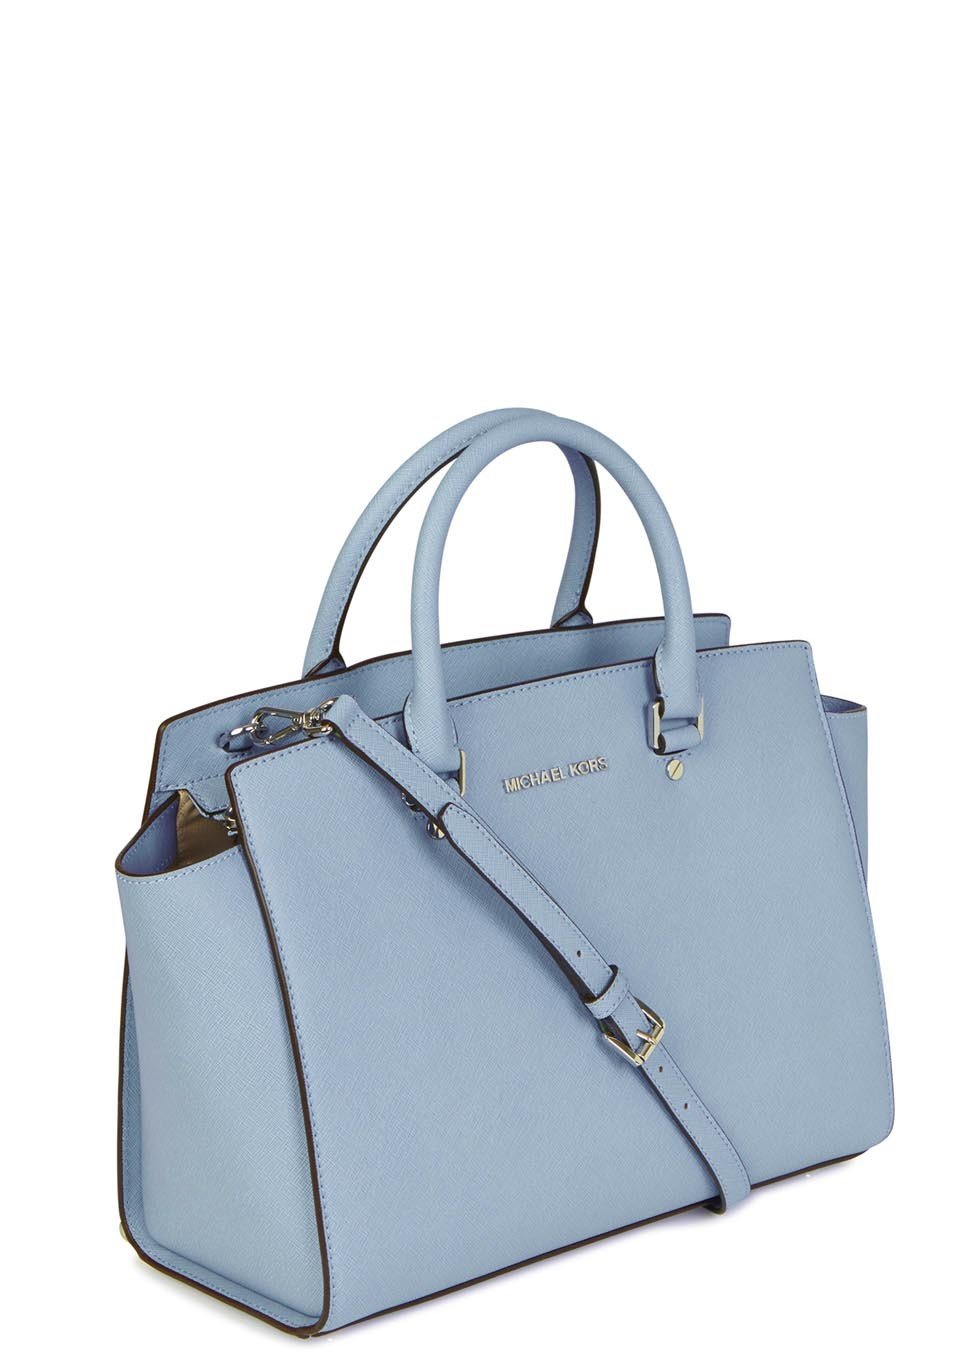 michael kors blue selma light blue saffiano leather tote product 1 19306696 1 267626674 normal